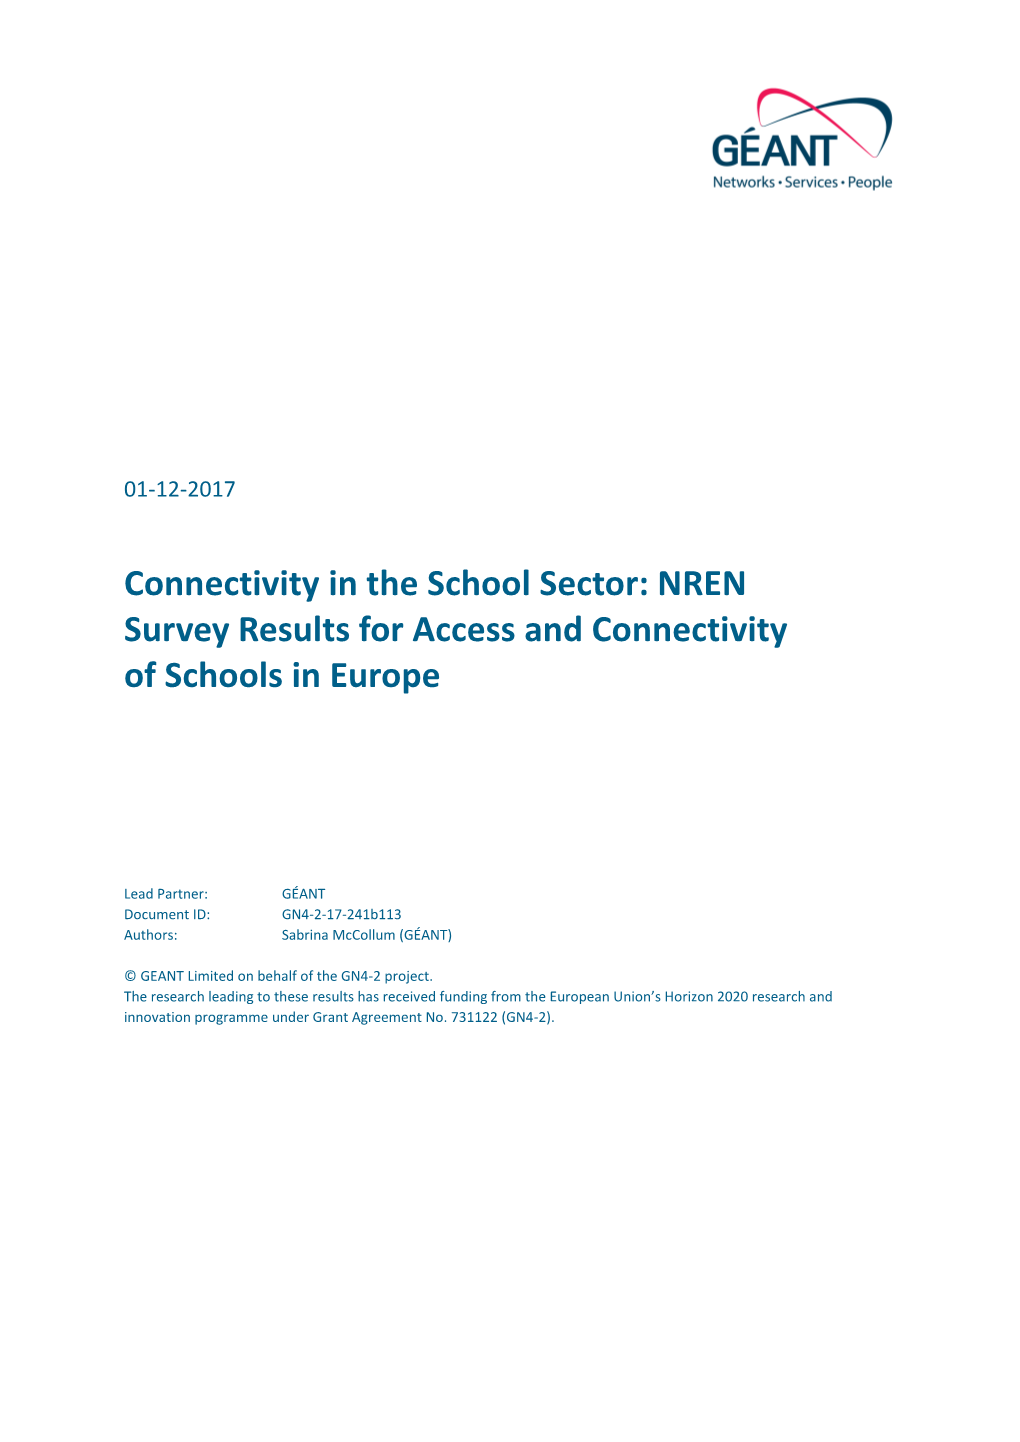 NREN Survey Results for Access and Connectivity of Schools in Europe